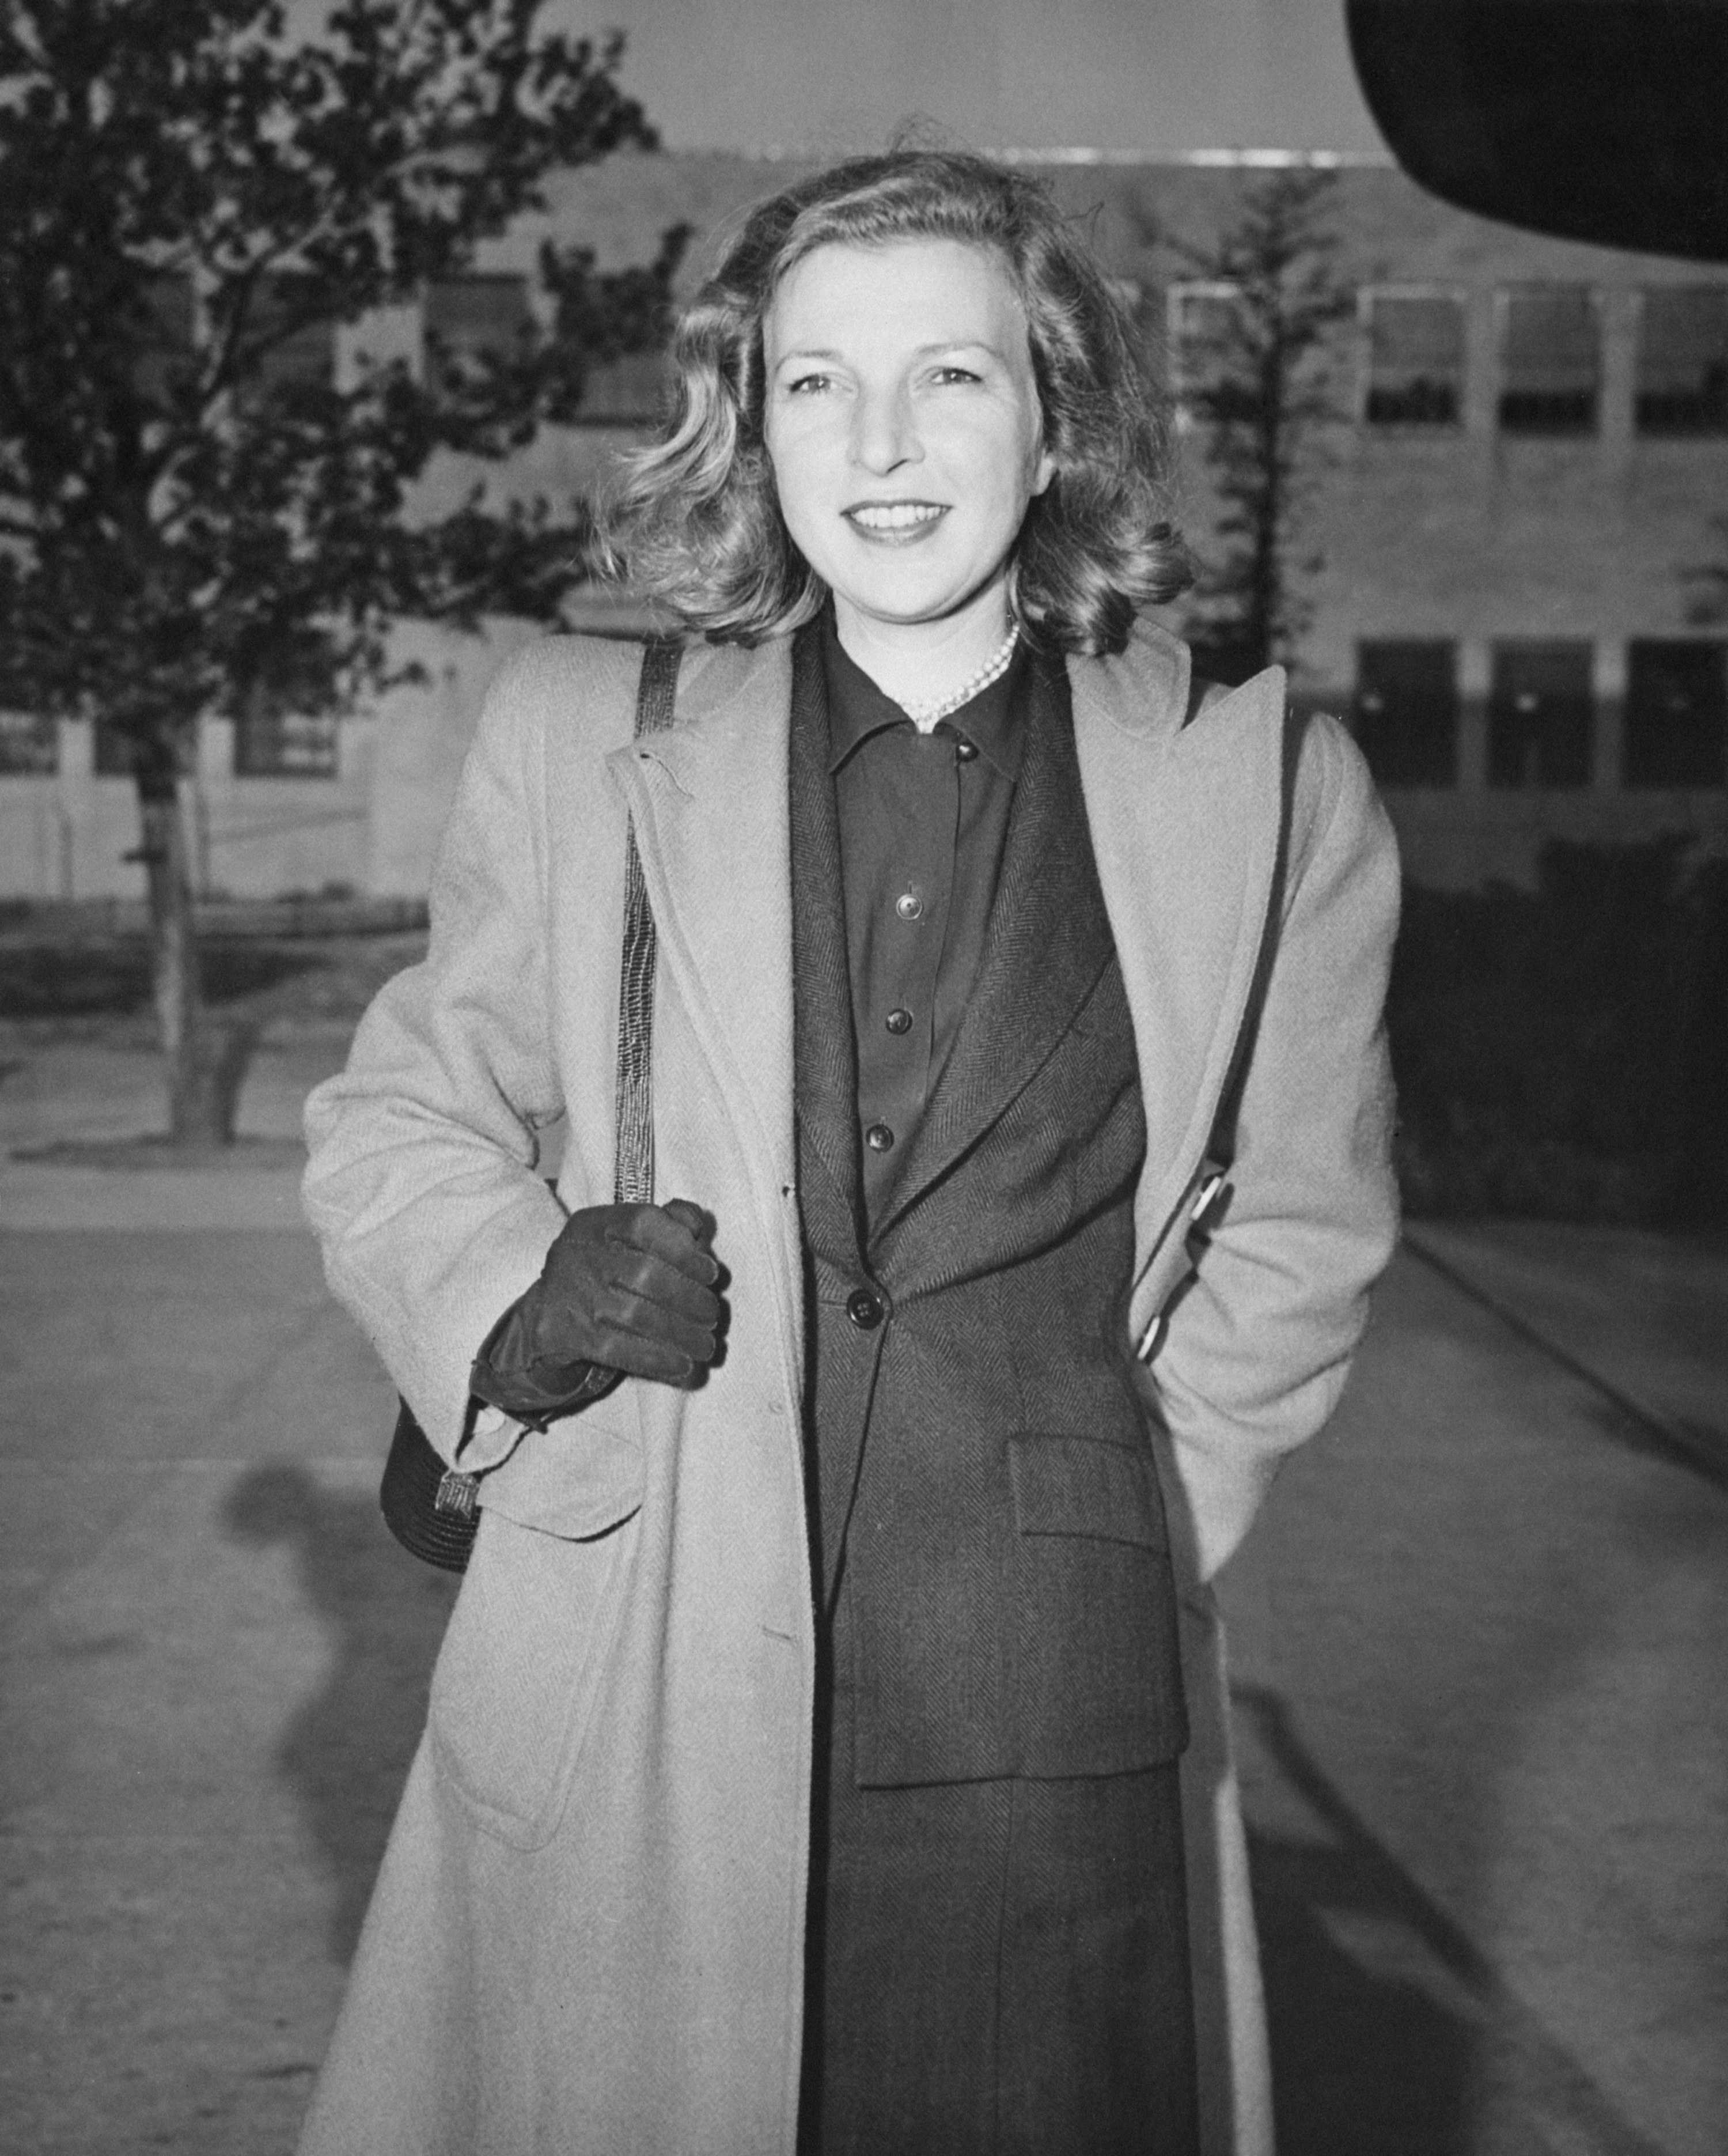 Martha Gellhorn wearing a three piece suit with a trenchcoat over it, holding her bag strap in one gloved hand. She has short wavy hair and is smiling